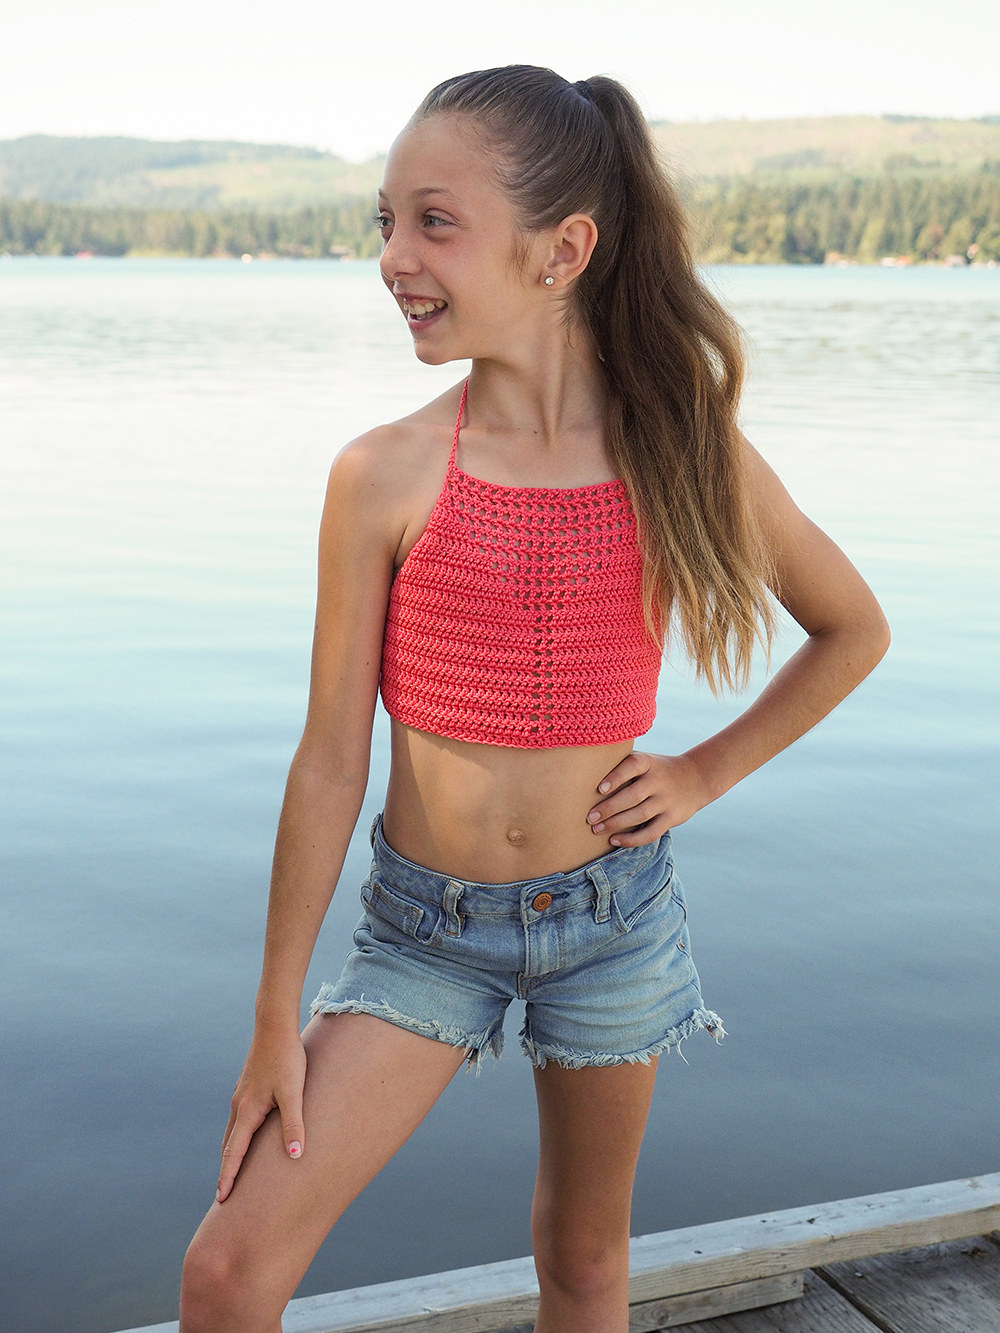 We love this girls' boho halter top crochet pattern. It's fun, easy to make and perfect for hot summer days. #crochetpattern #crochetlove #crochetaddict #crochettop